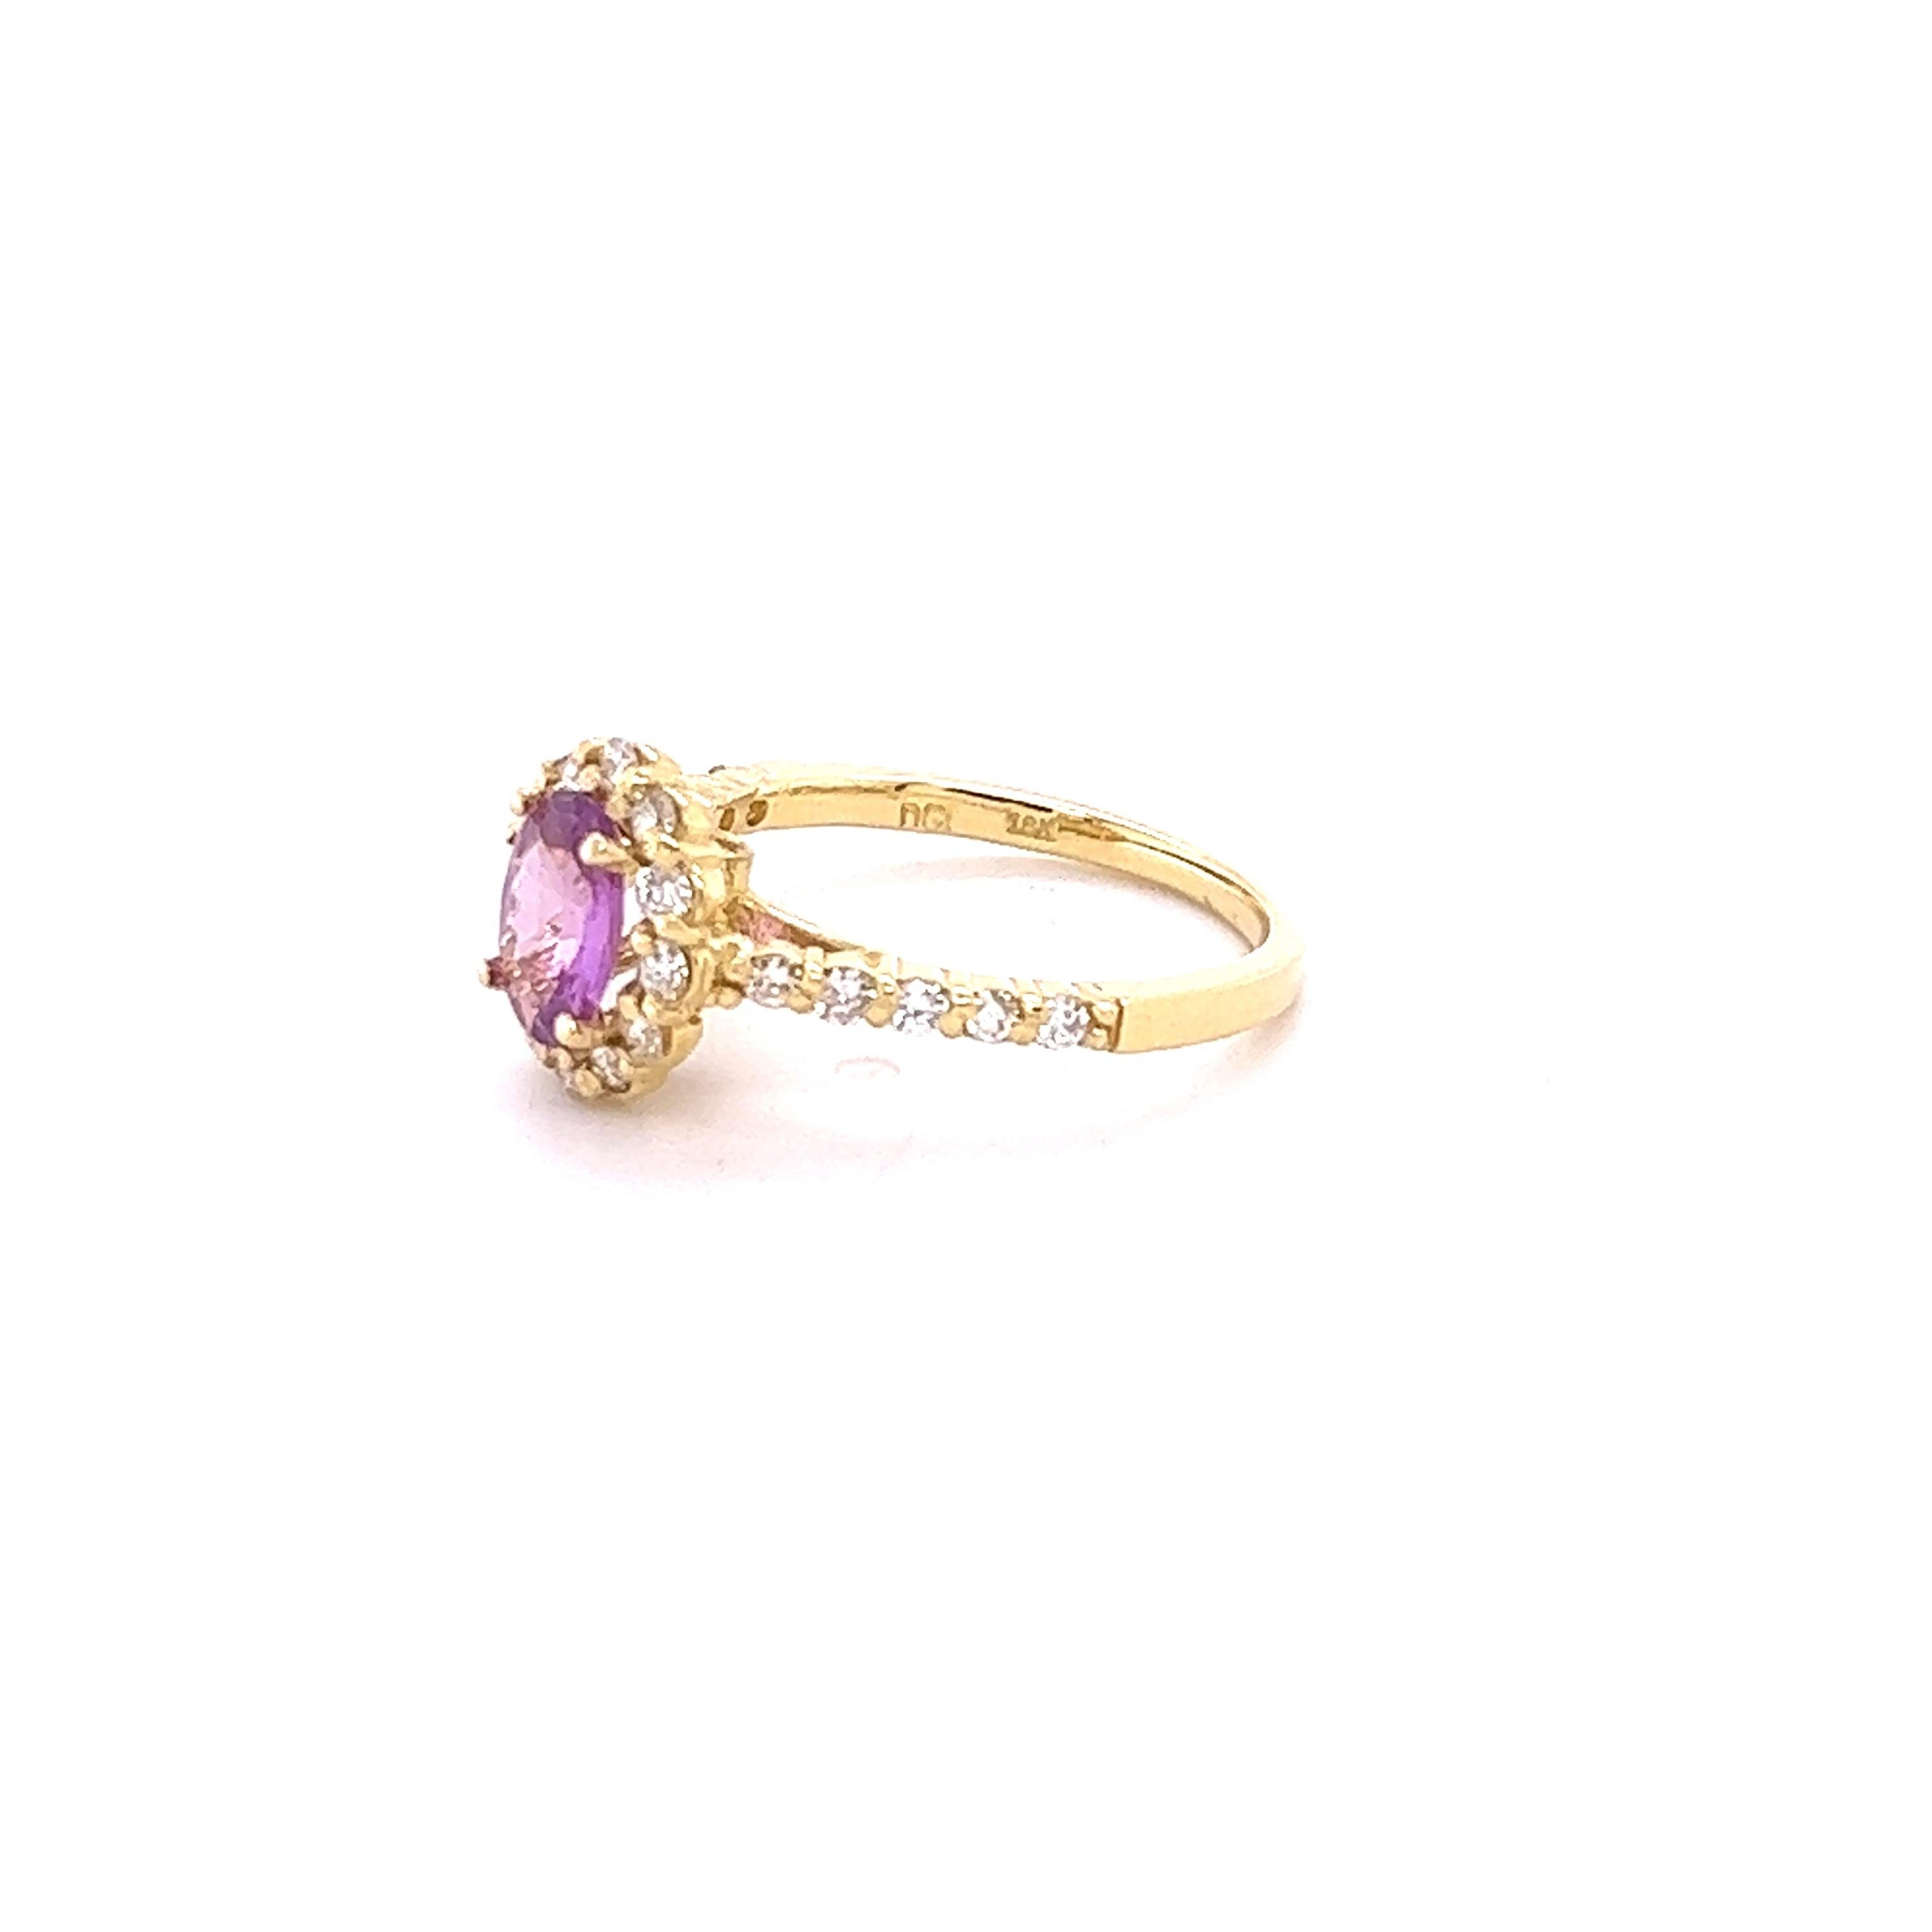 Contemporary GIA Certified No Heat 1.63 Carat Pink Sapphire Diamond 18 Karat Yellow Gold Ring For Sale